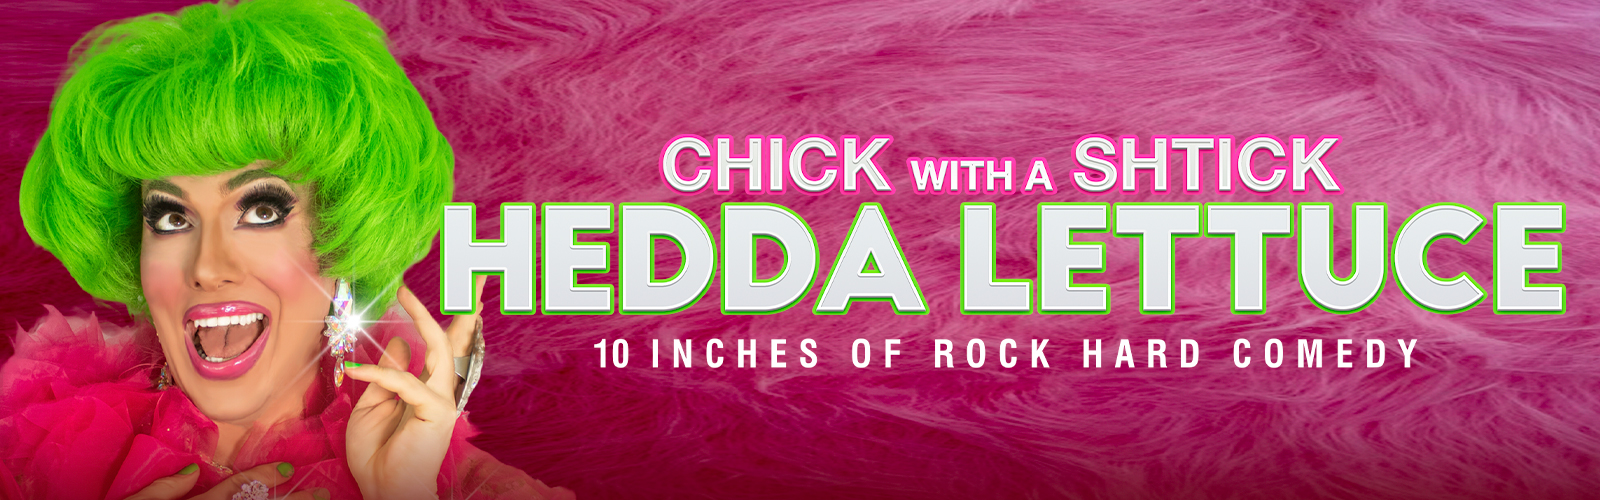 CHICK WITH A SHTICK (Drag show starring Hedda Lettuce)